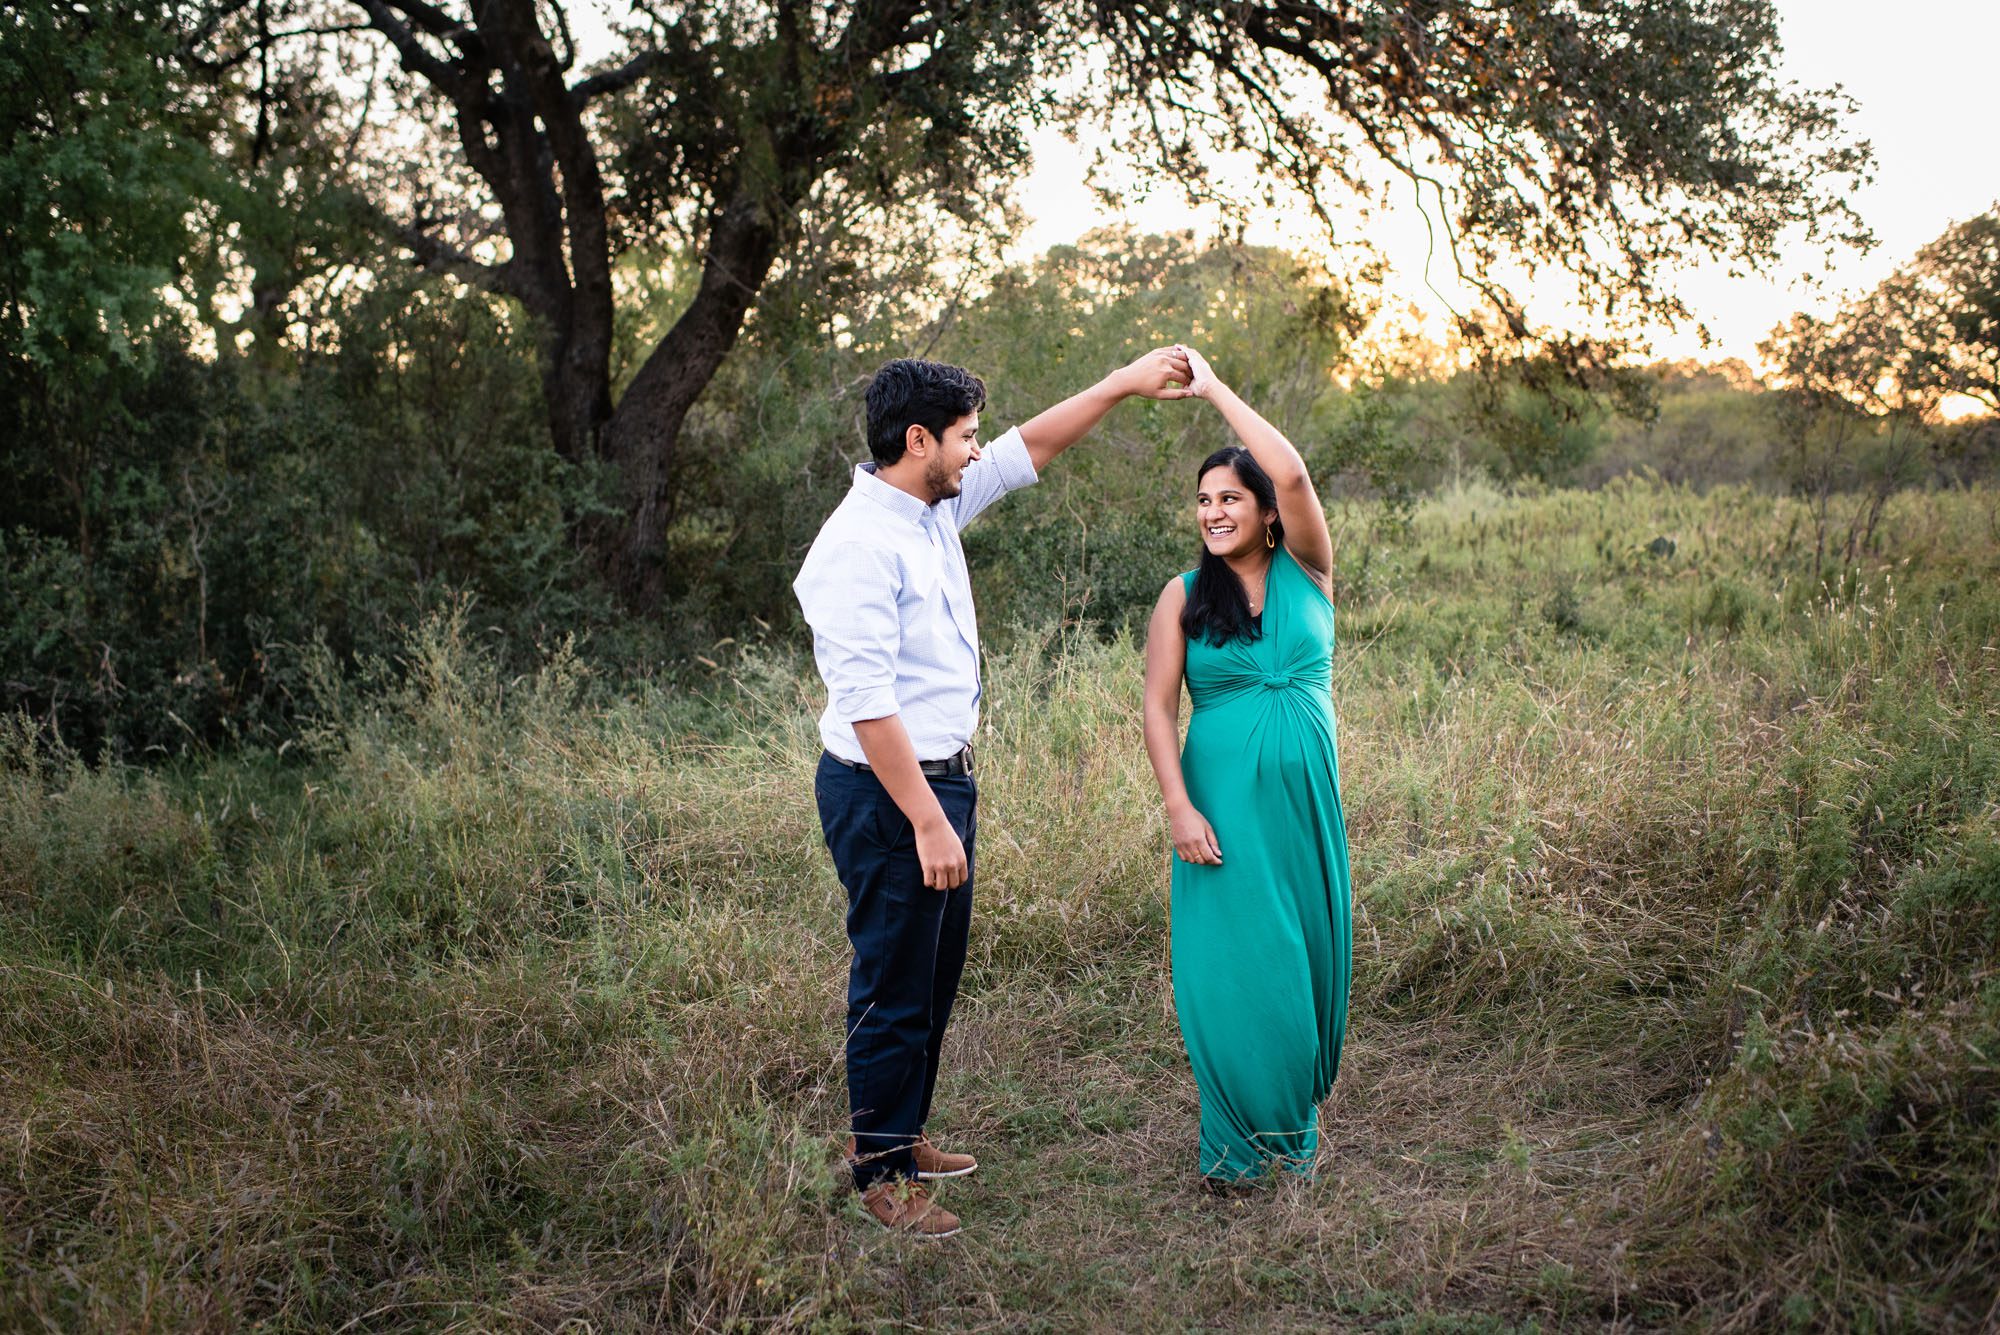 Couple dancing in a field, Best San Antonio Maternity Photographer